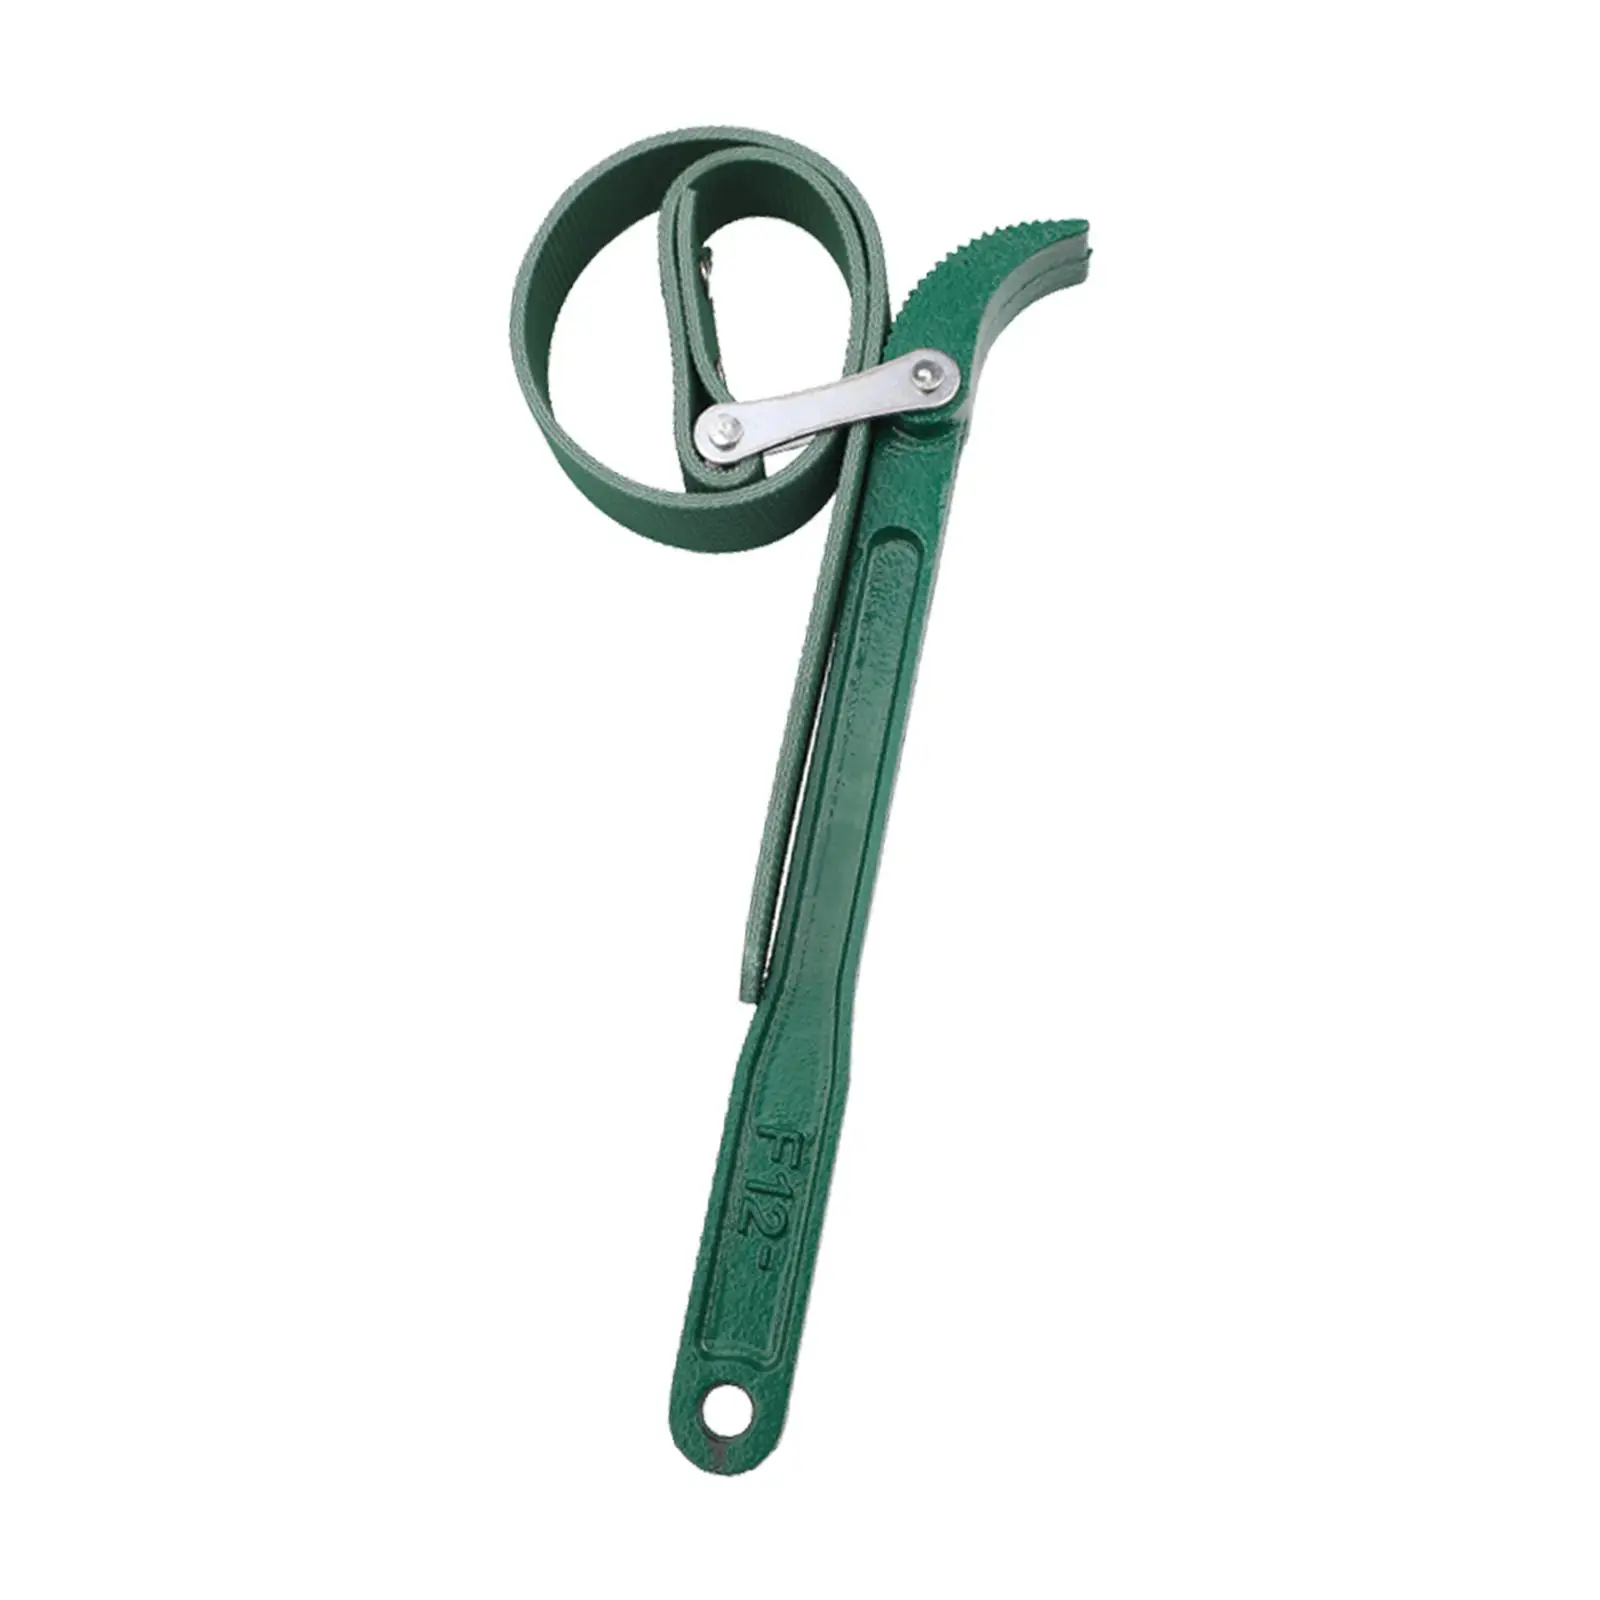 Strap Filter Wrench Non Slip Multifunction Pipe Fittings Tools Belt Strap Wrench for Opening Pipe Fittings Plumbing Automotive